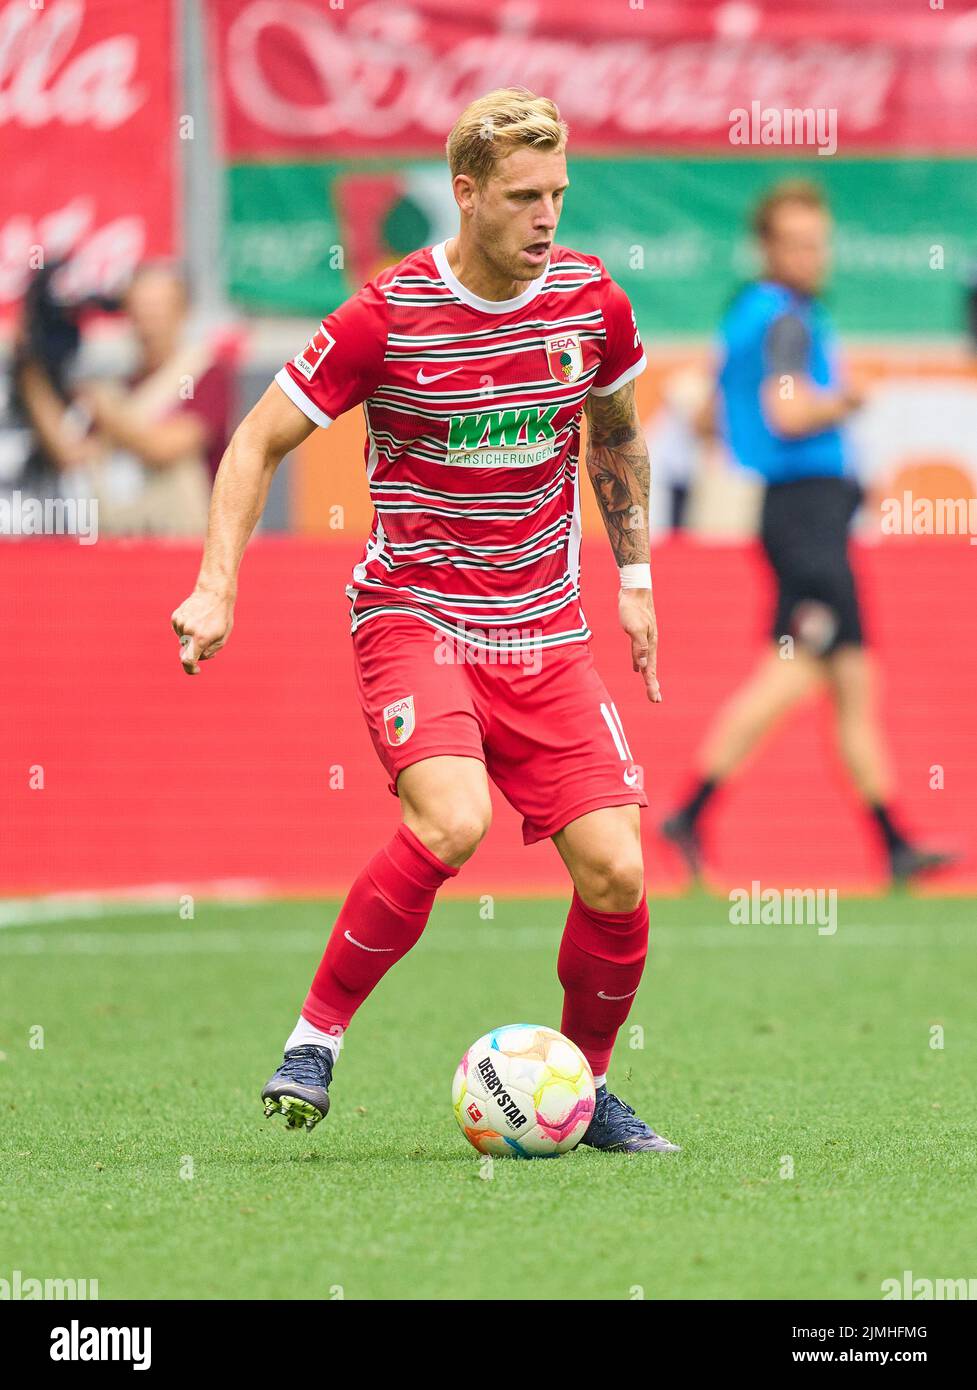 Arne Maier, FCA 10  in the match FC AUGSBURG - SC FREIBURG 0-4 1.German Football League on Aug 06, 2022 in Augsburg, Germany. Season 2022/2023, matchday 1, 1.Bundesliga, FCB, Munich, 1.Spieltag © Peter Schatz / Alamy Live News    - DFL REGULATIONS PROHIBIT ANY USE OF PHOTOGRAPHS as IMAGE SEQUENCES and/or QUASI-VIDEO - Stock Photo